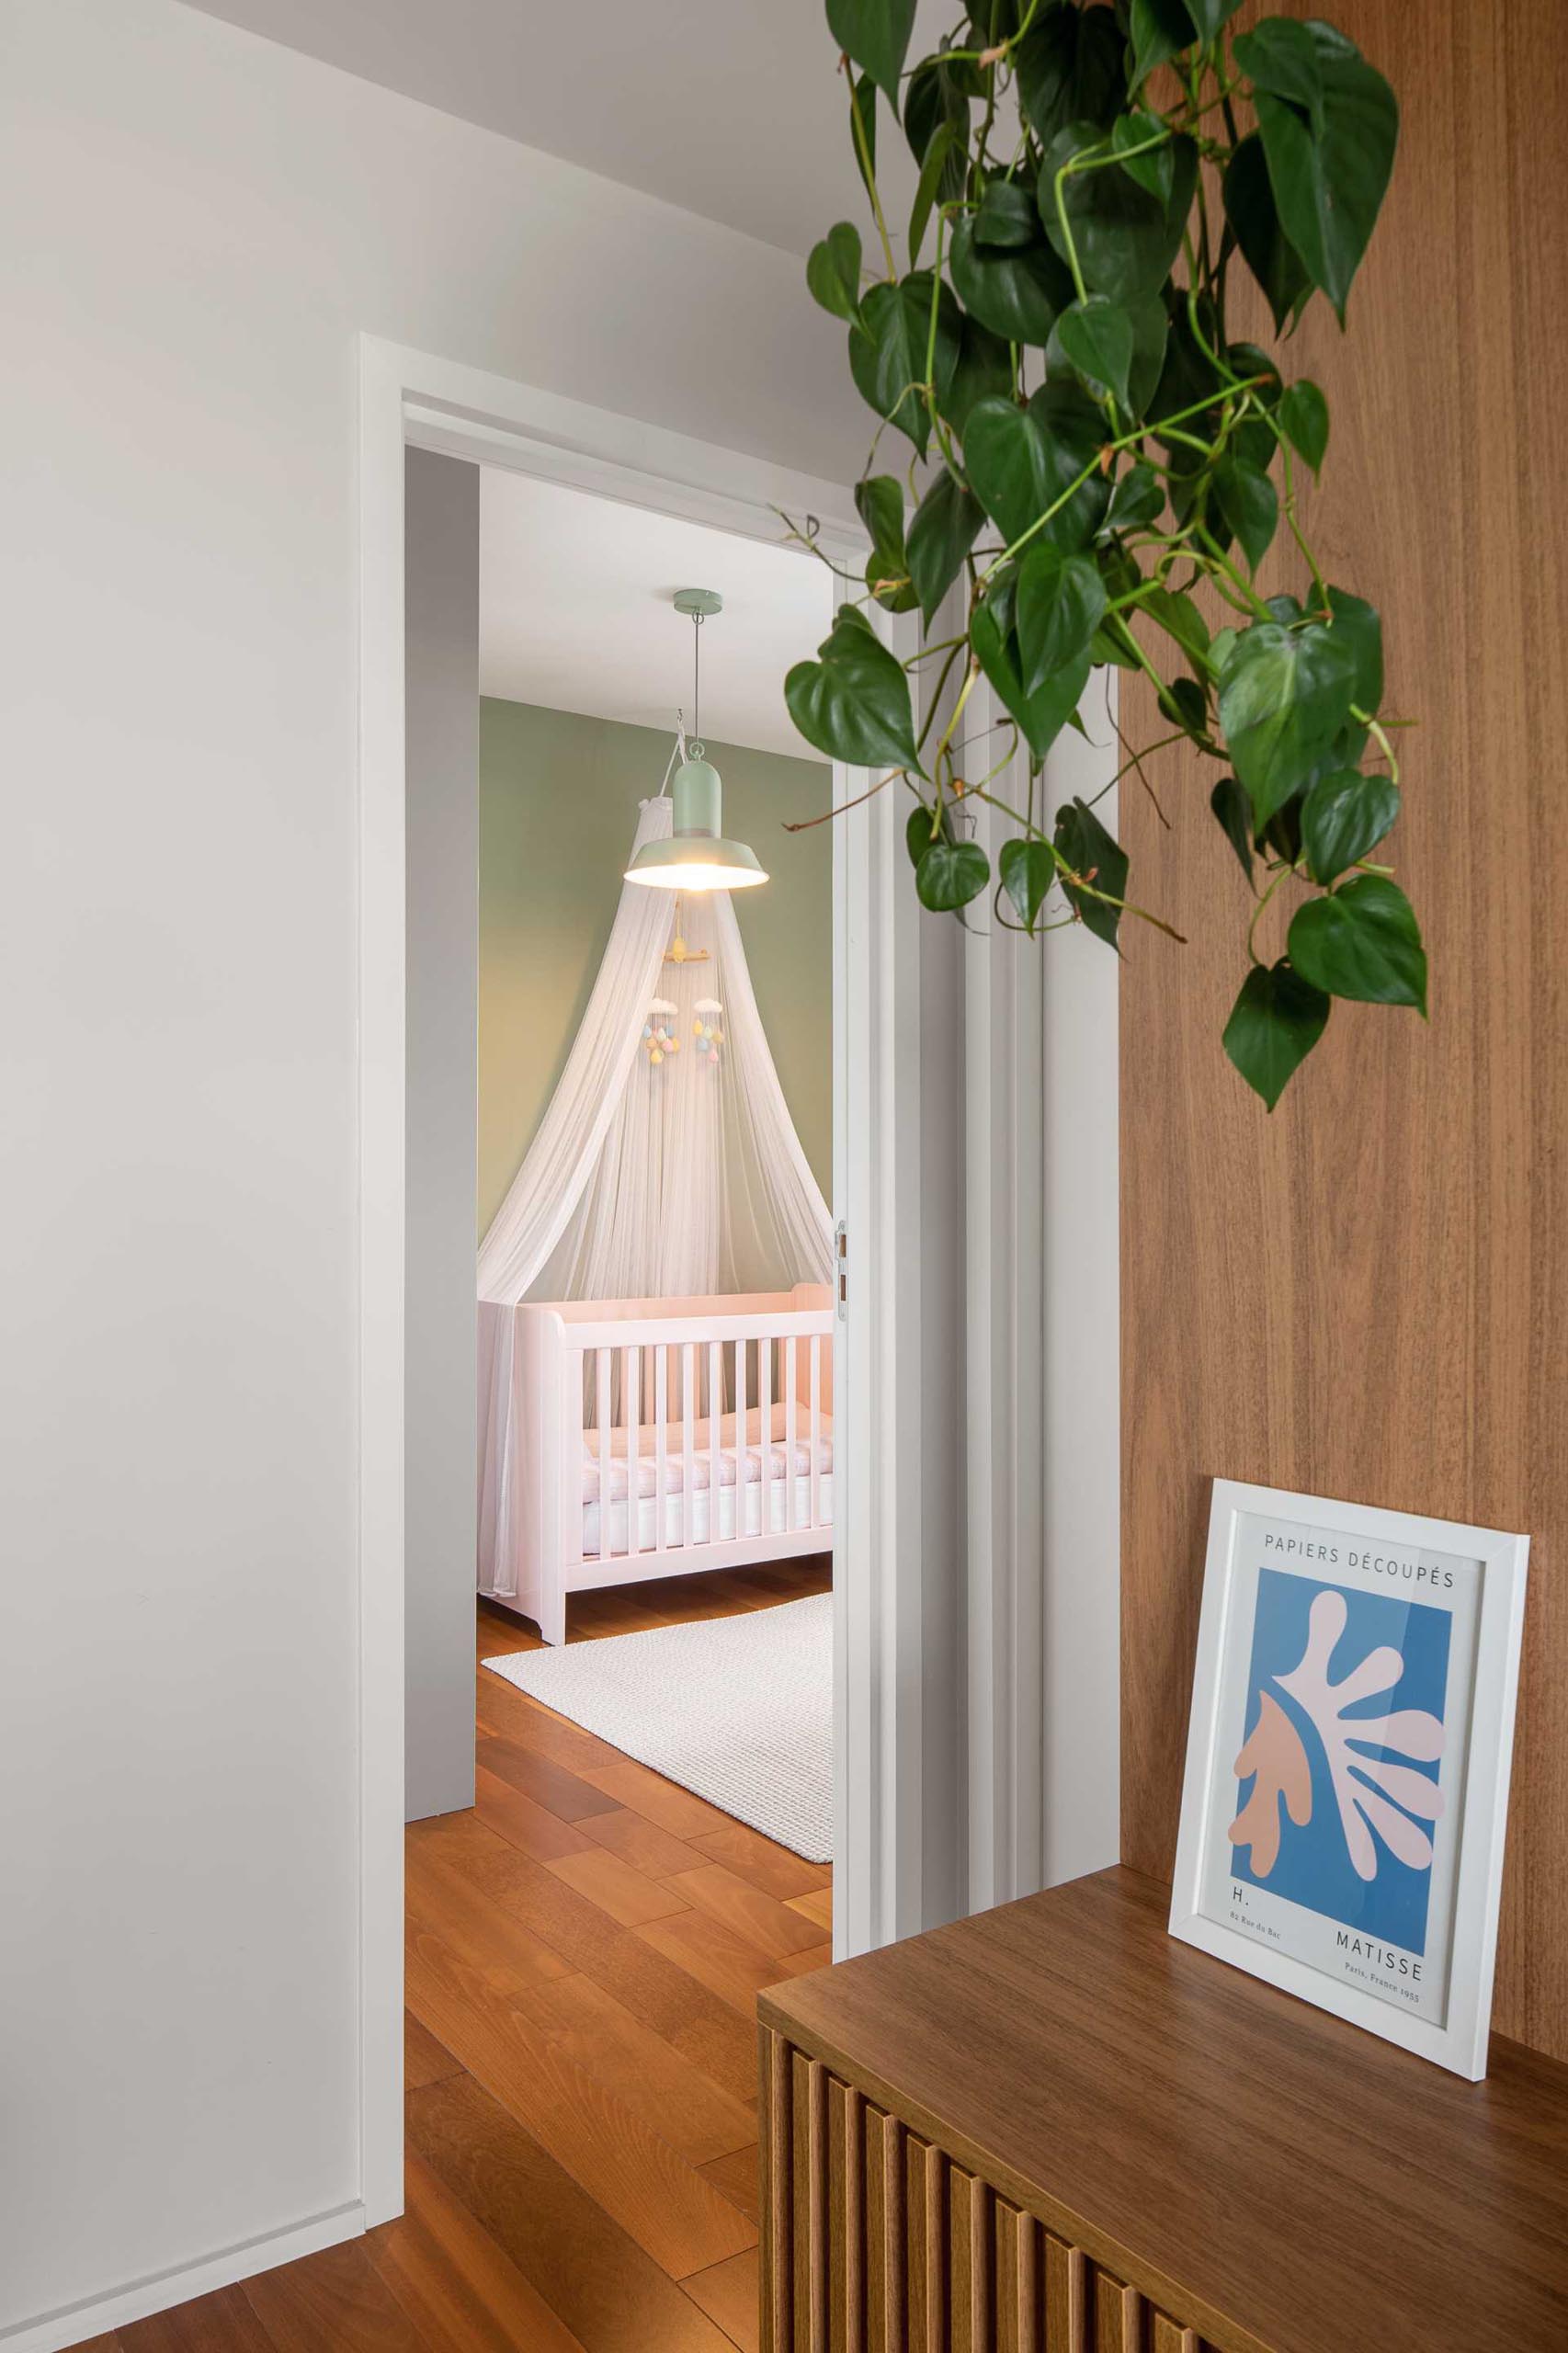 In this modern nursery, there's a light green accent wall that stands out against pale pink crib.